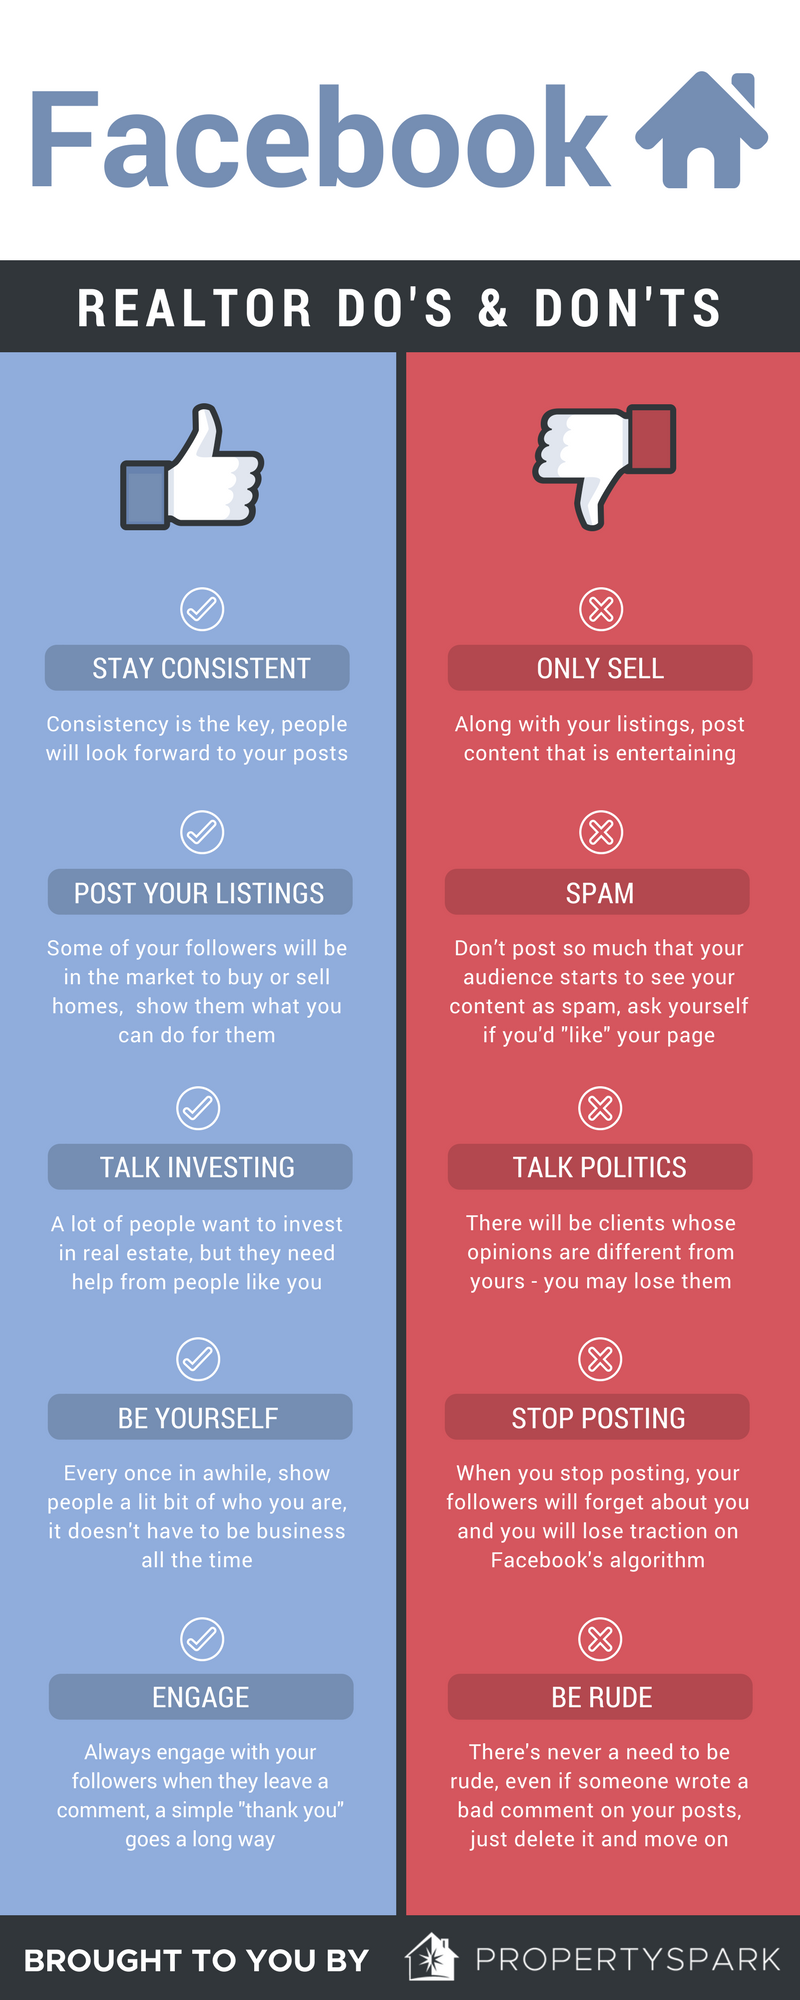 Realtor Dos and Donts on Facebook Infographic